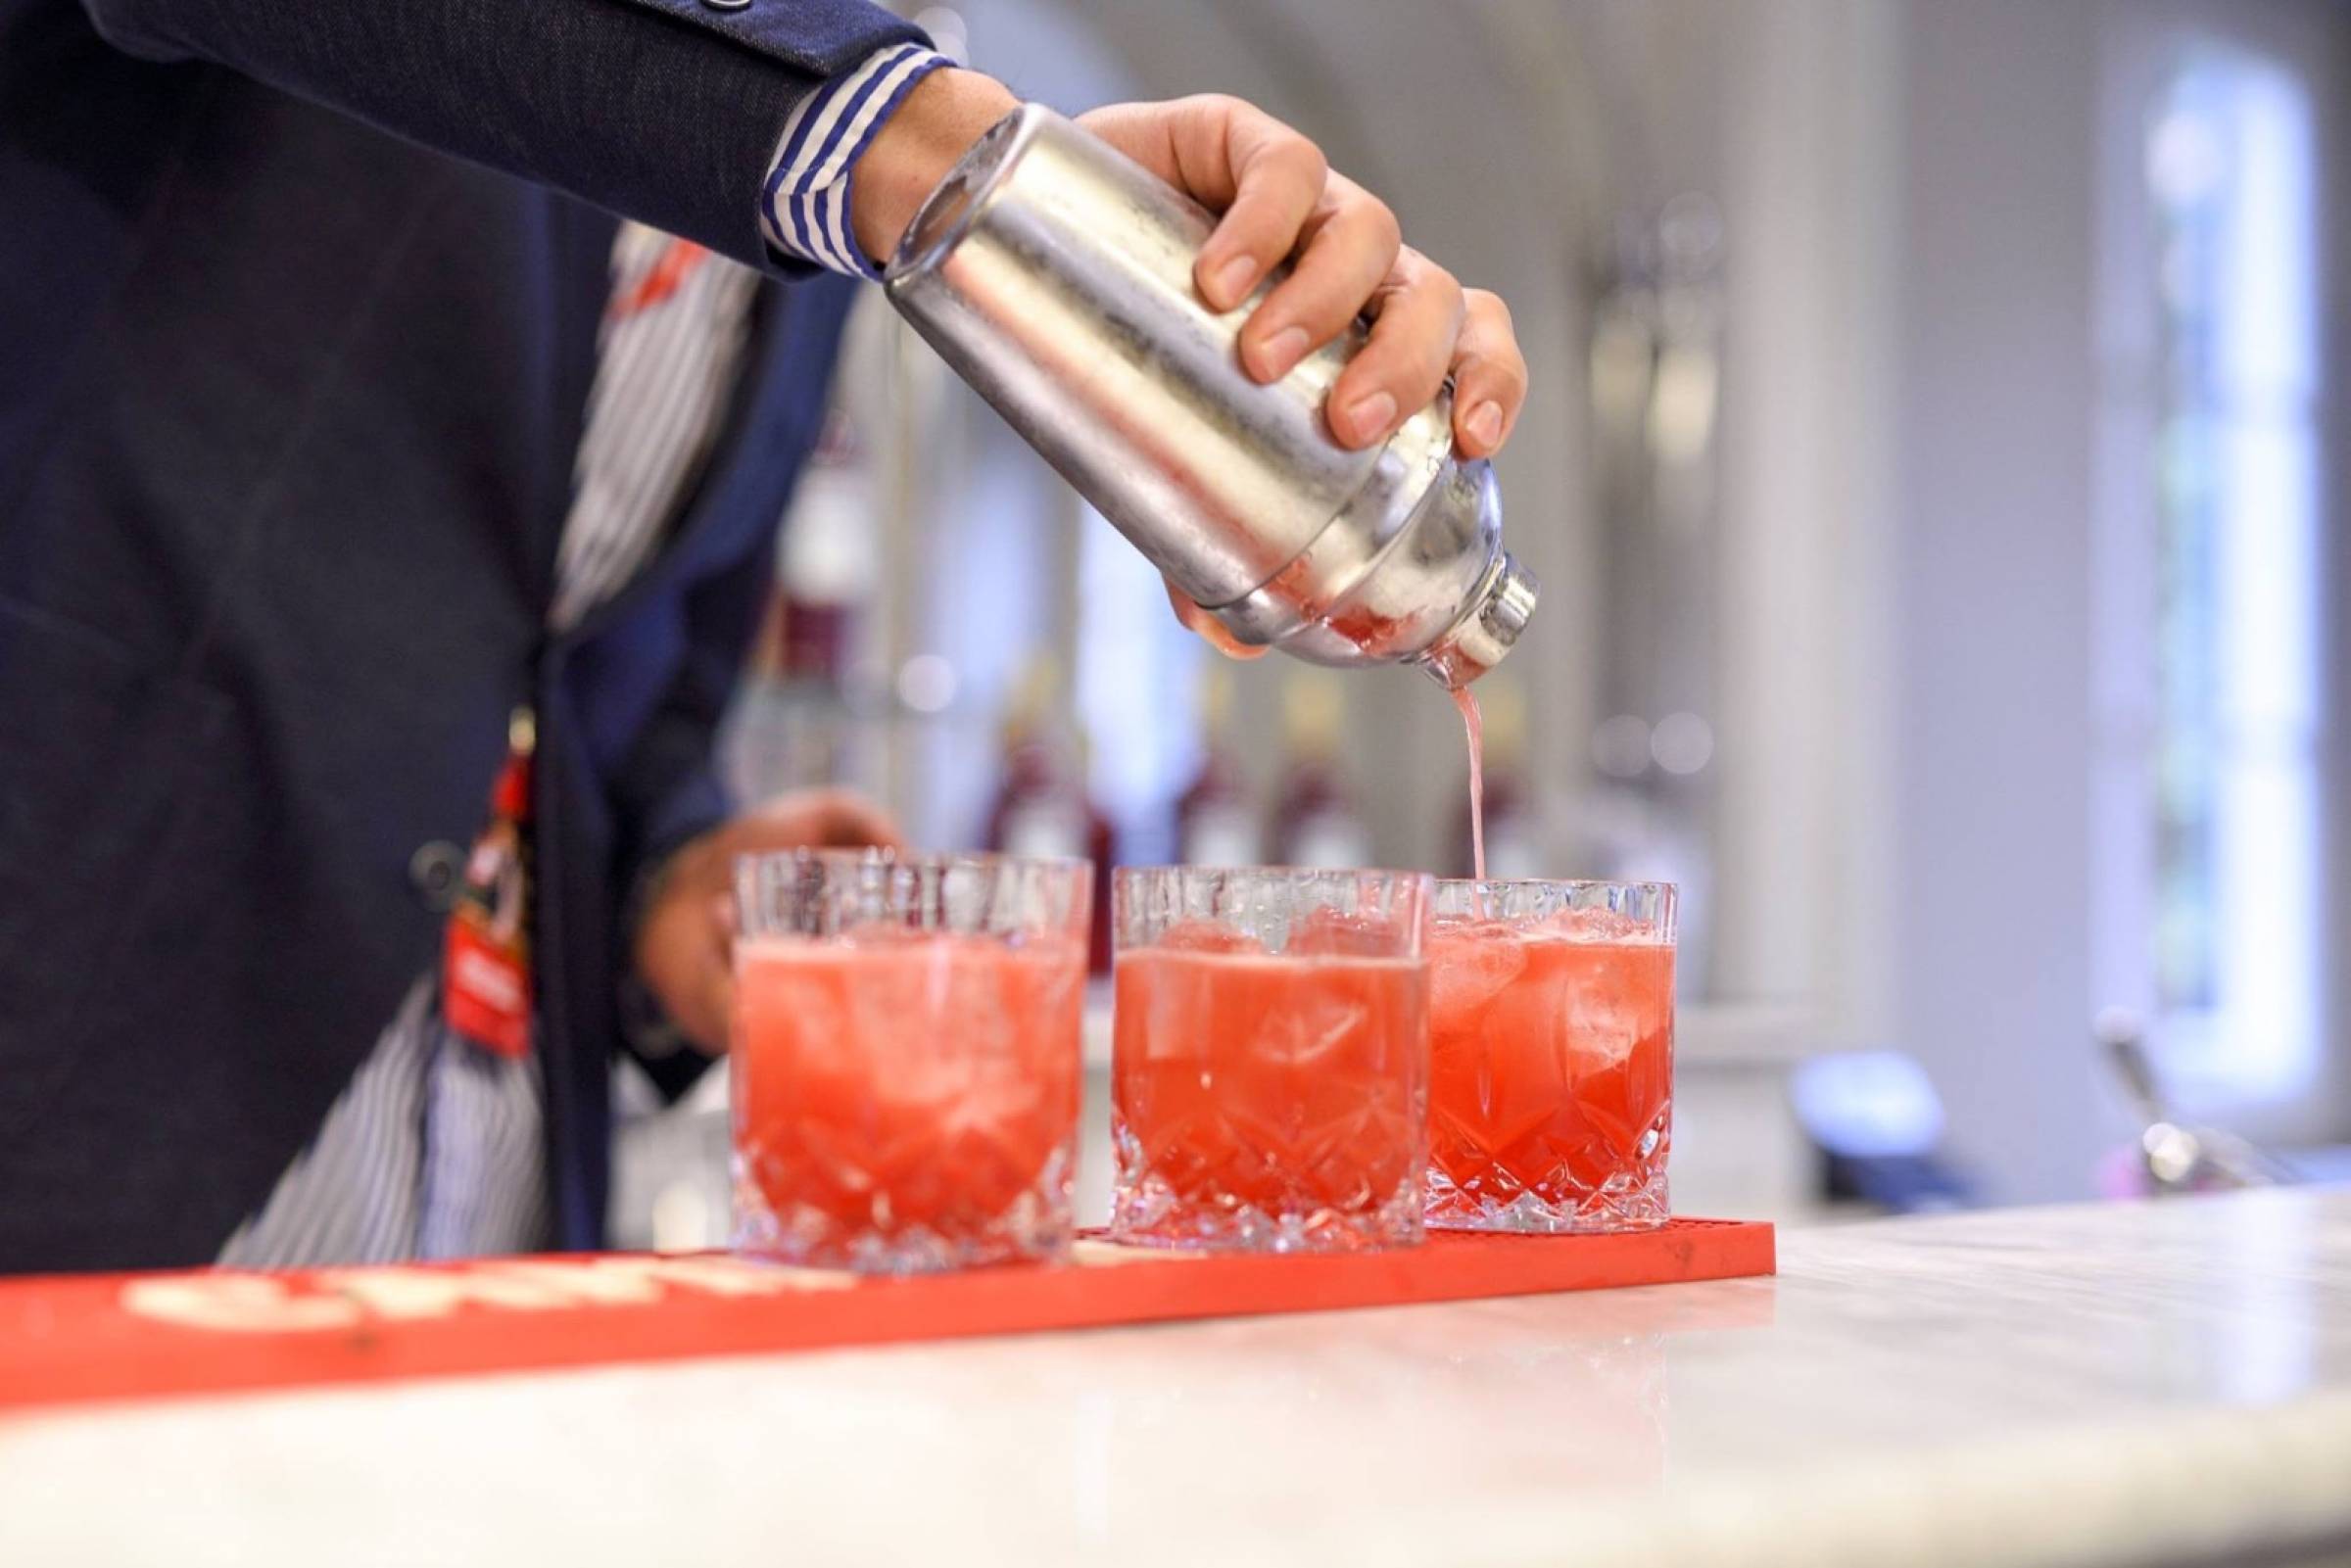 Nicolò goes to the Campari Competition in Milan